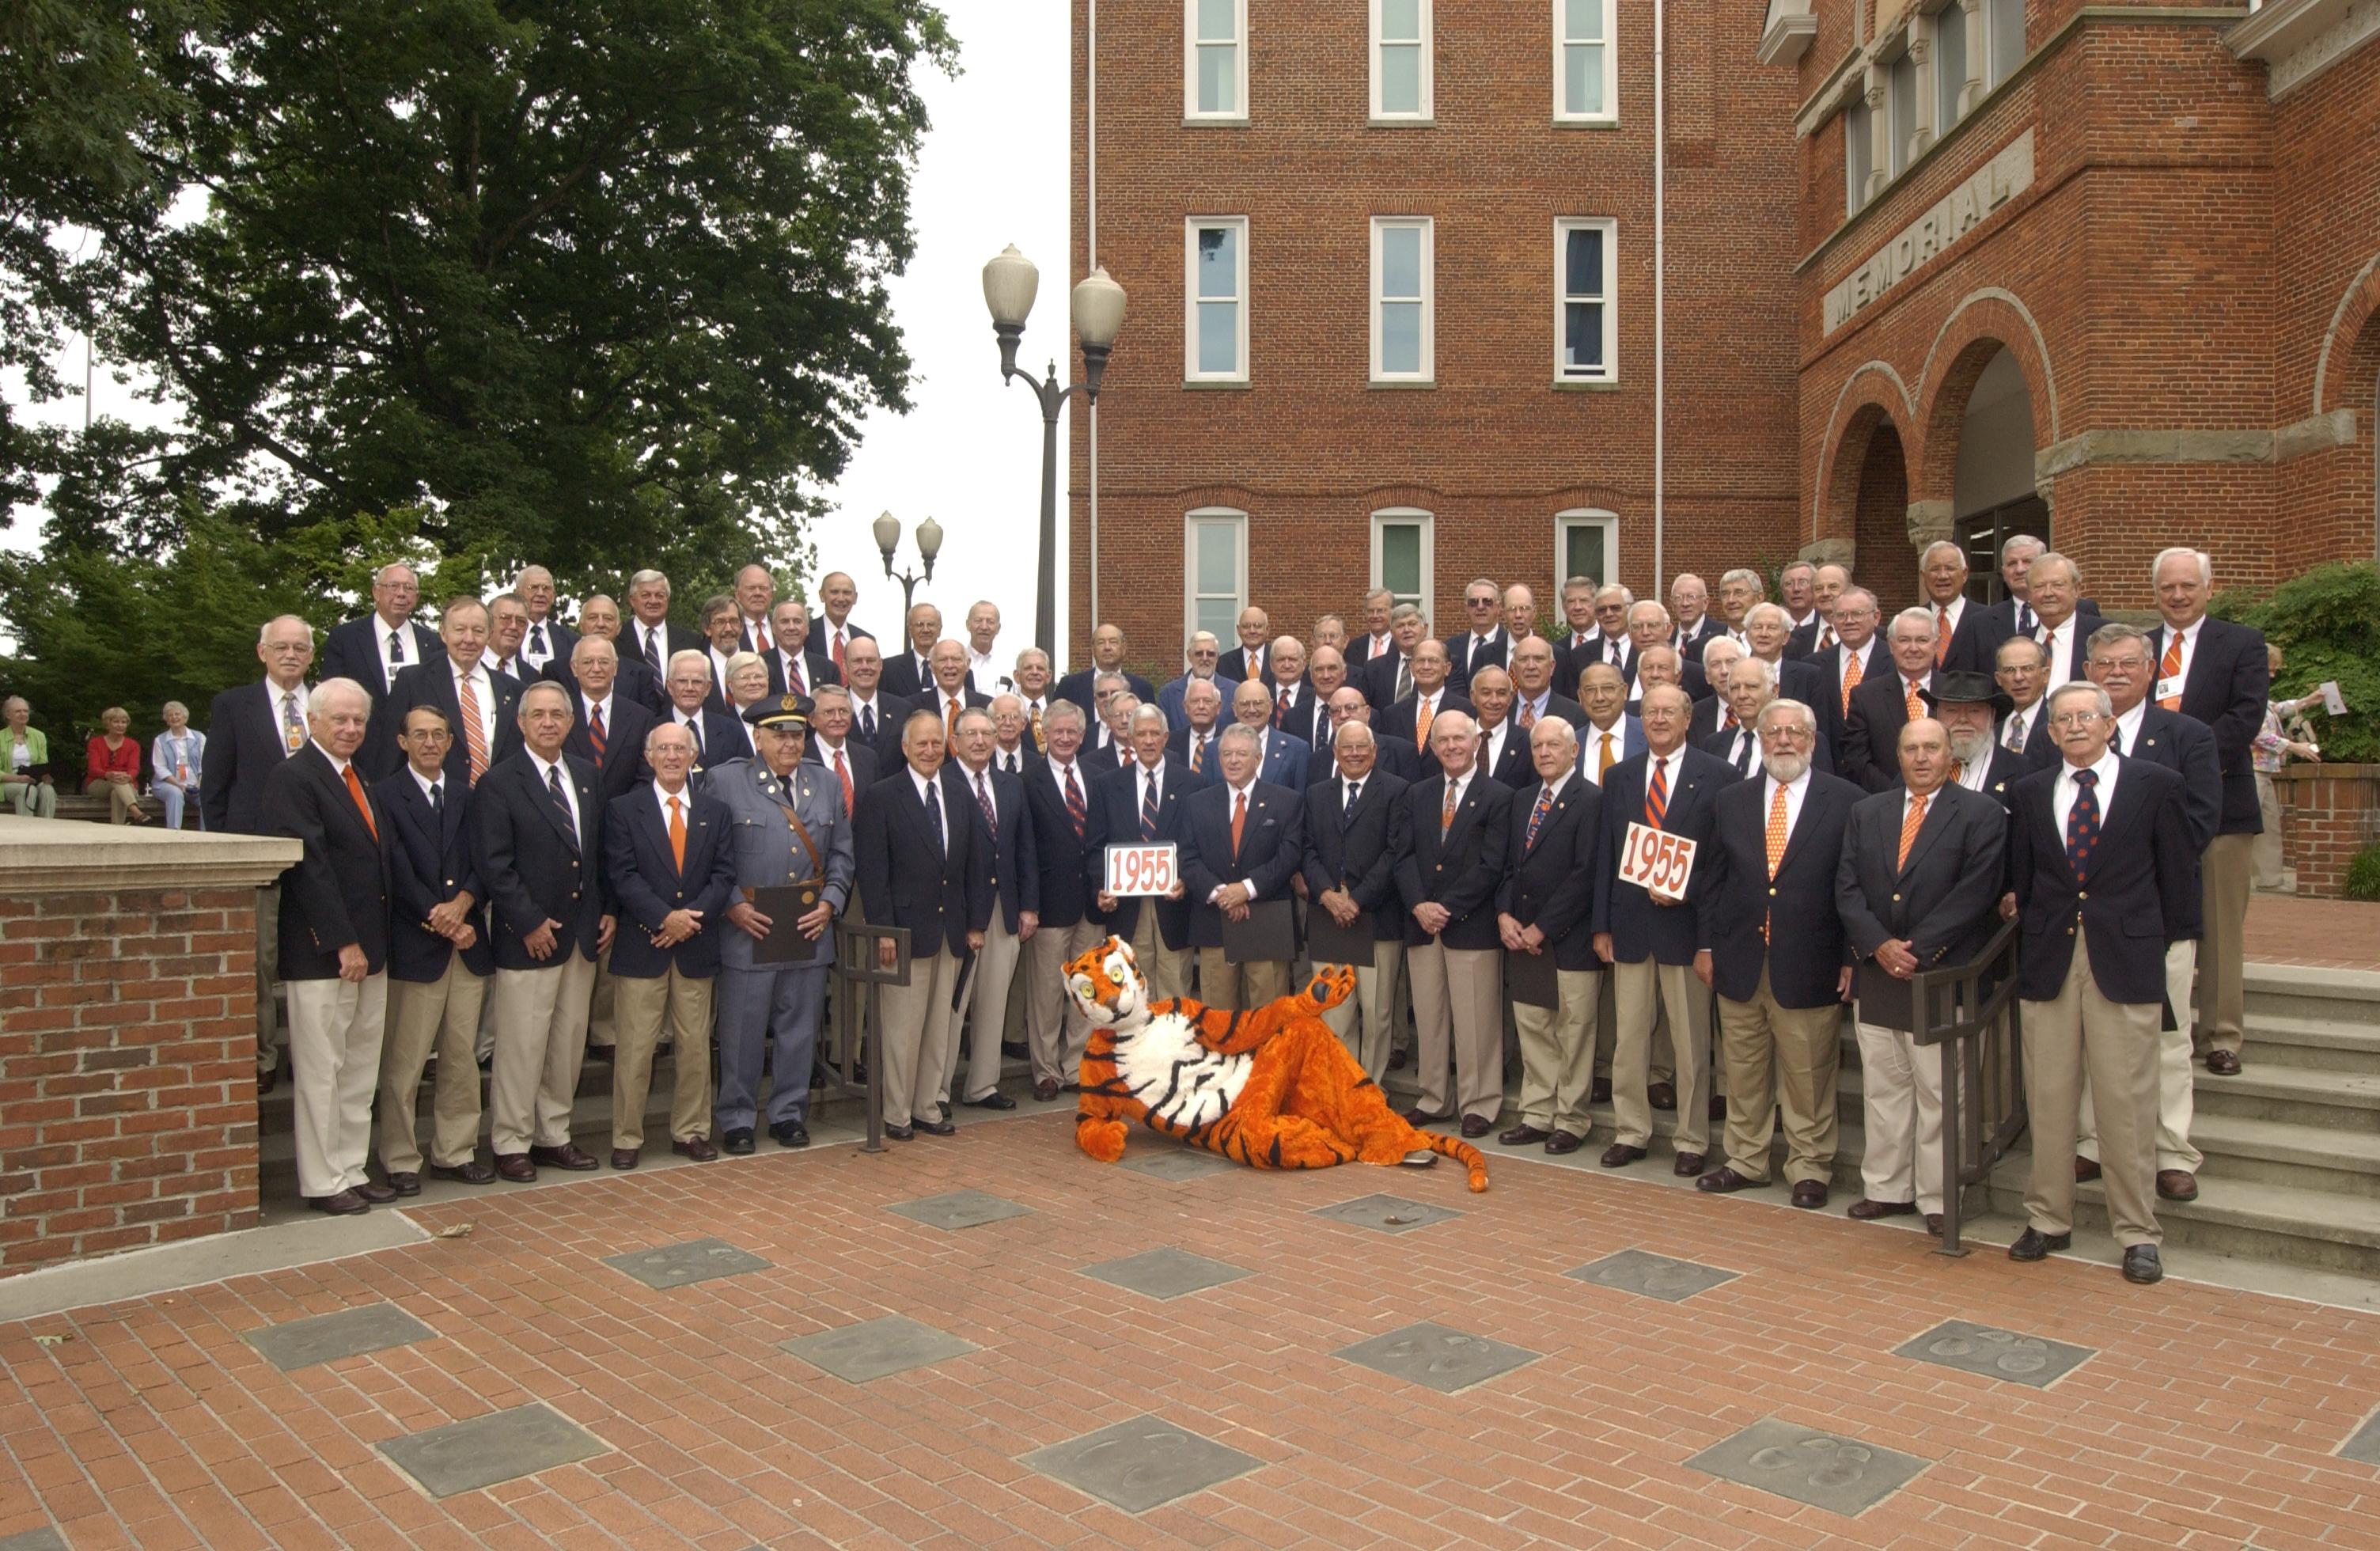 Class of 55 group photo outside on Campus grounds